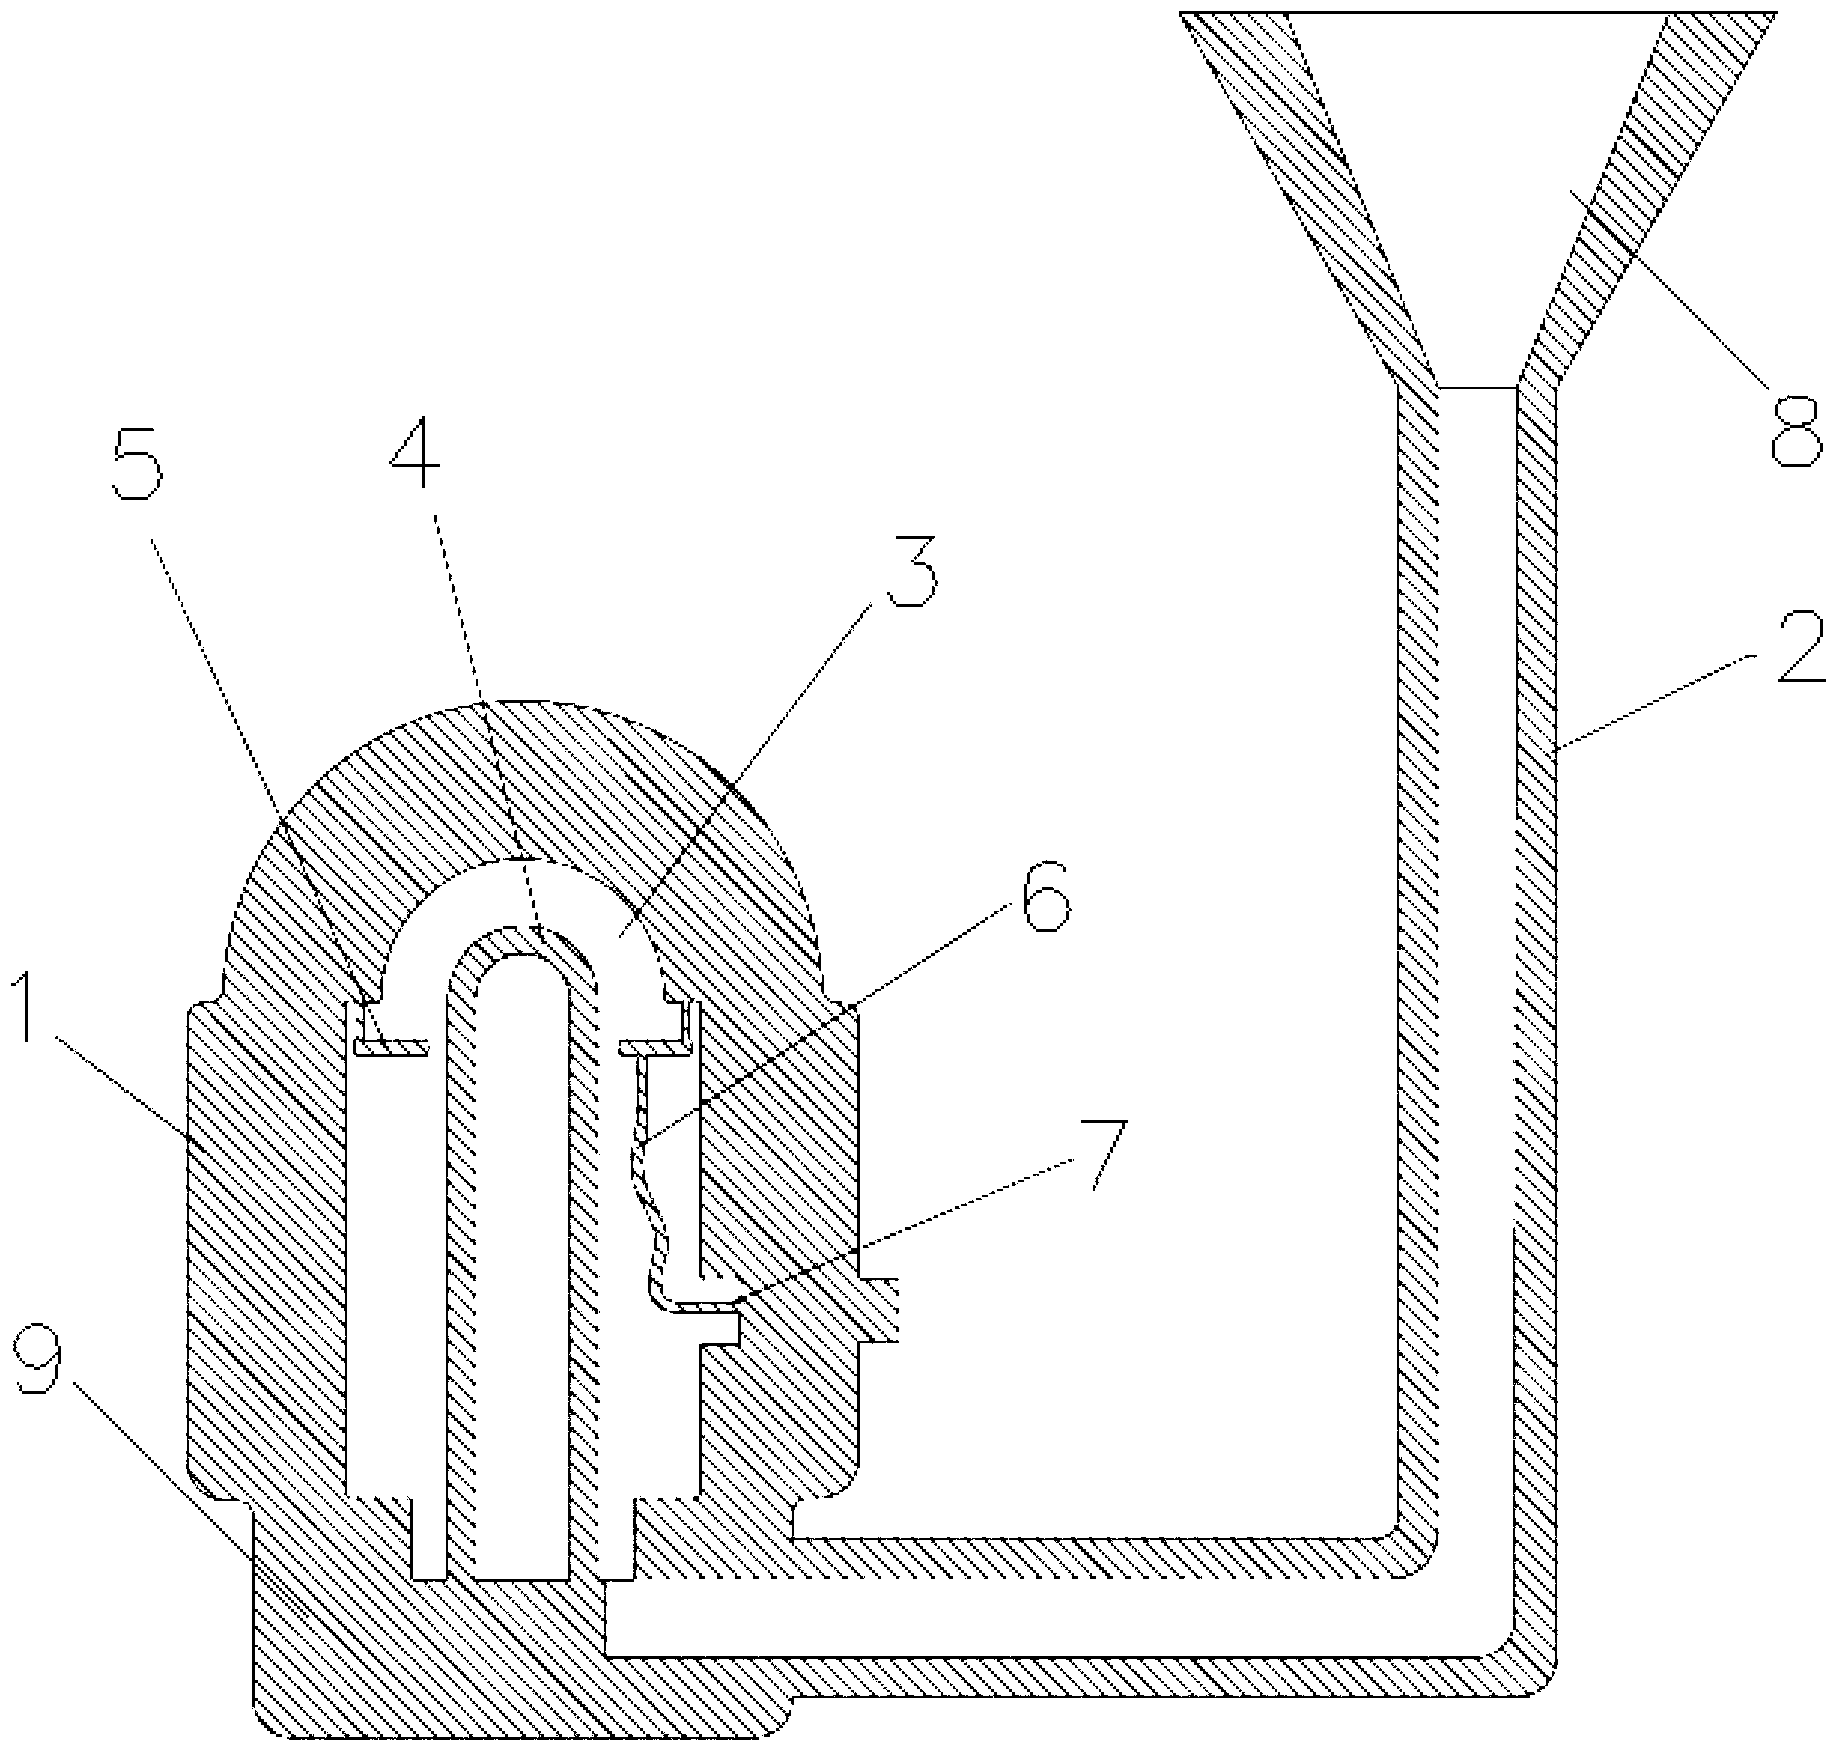 Device and method for quickly fabricating electrode